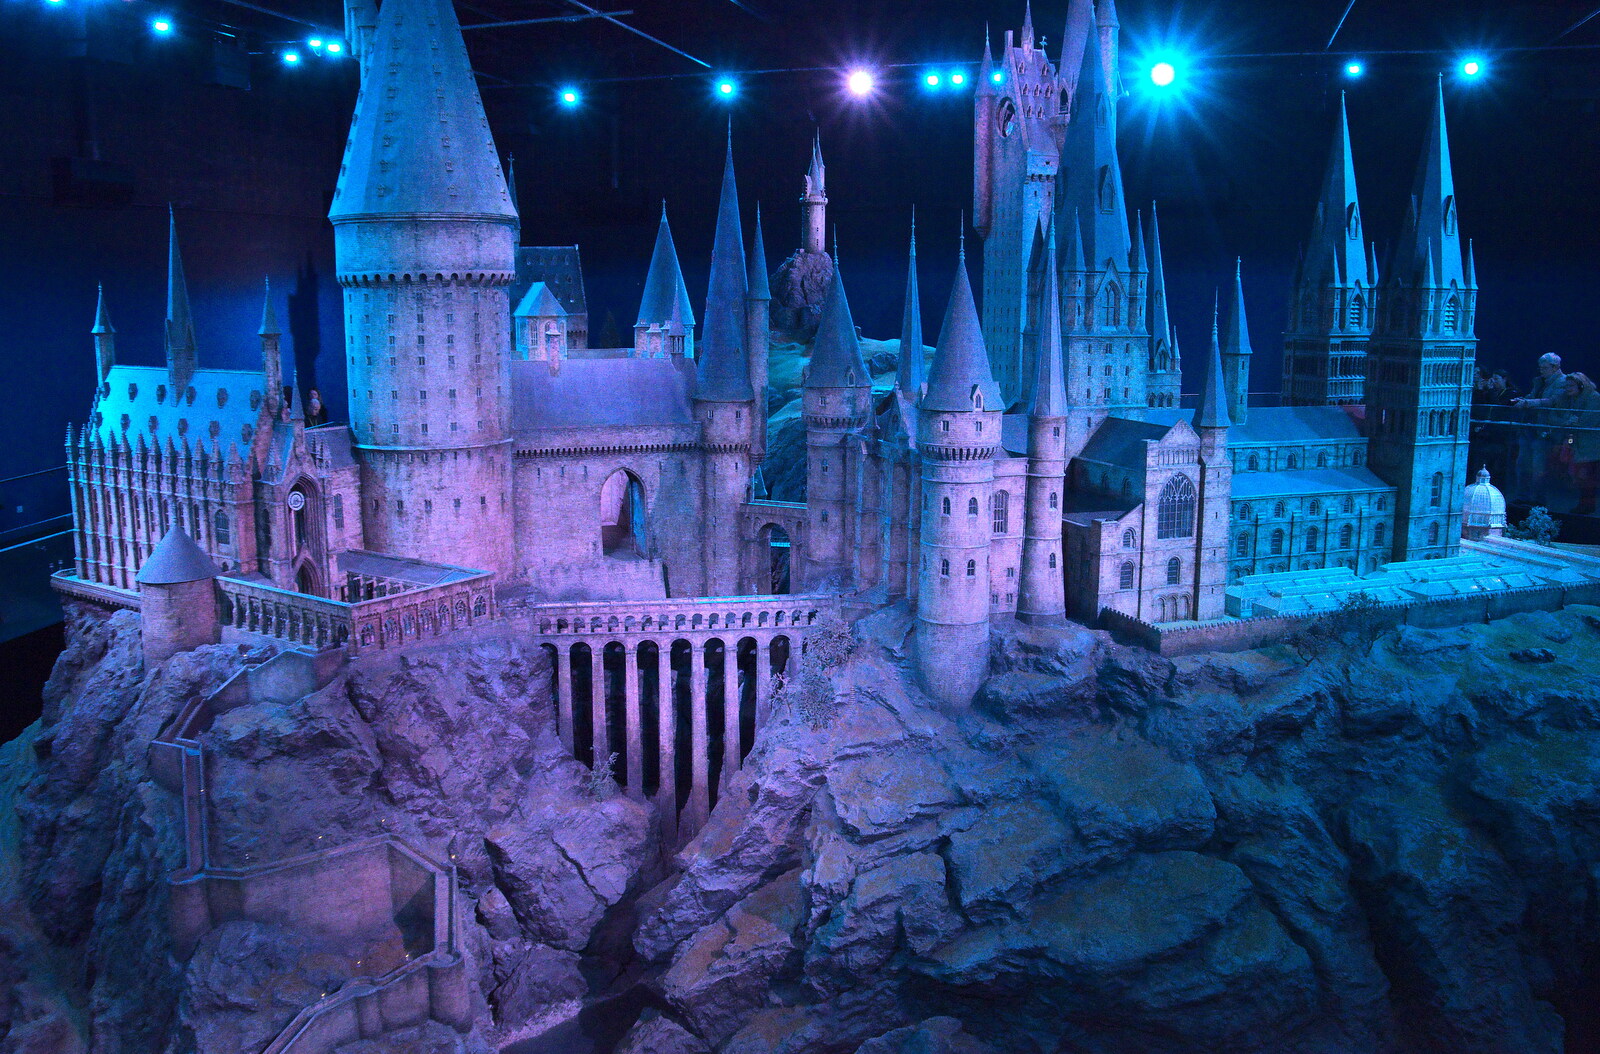 The amazing Hogwart's model from A Trip to Harry Potter World, Leavesden, Hertfordshire - 16th February 2020